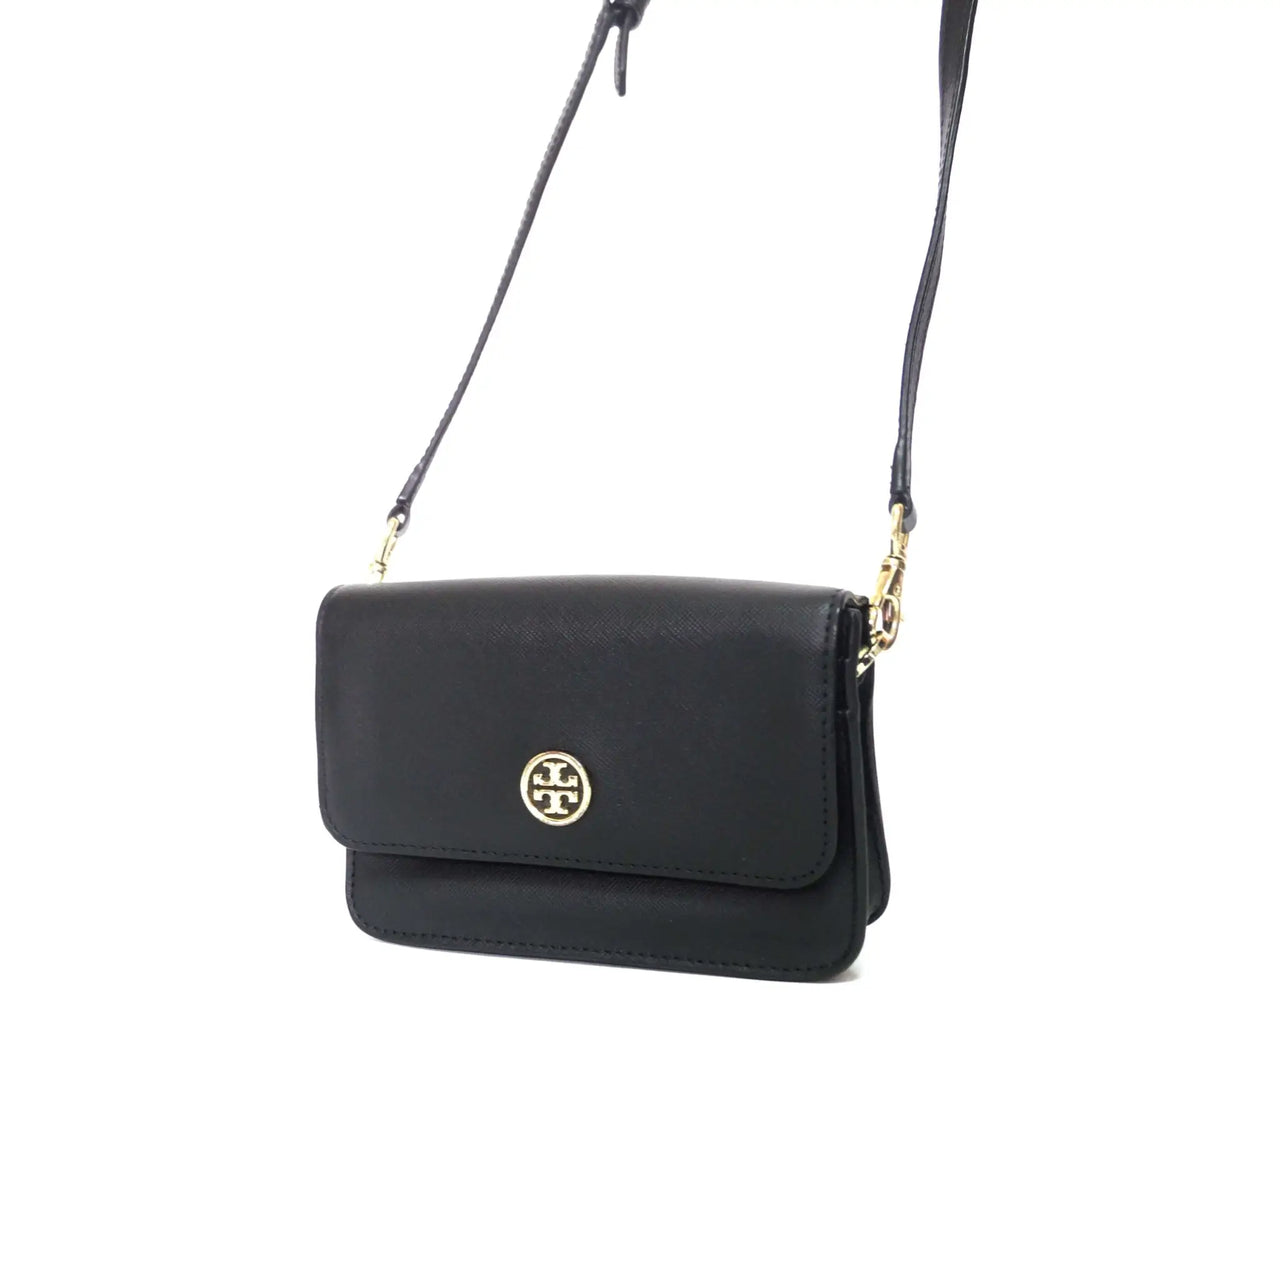 Tory Burch | Bags | Gorgeous Tory Burch Leather Bag Classic Peice For  Everyday | Poshmark